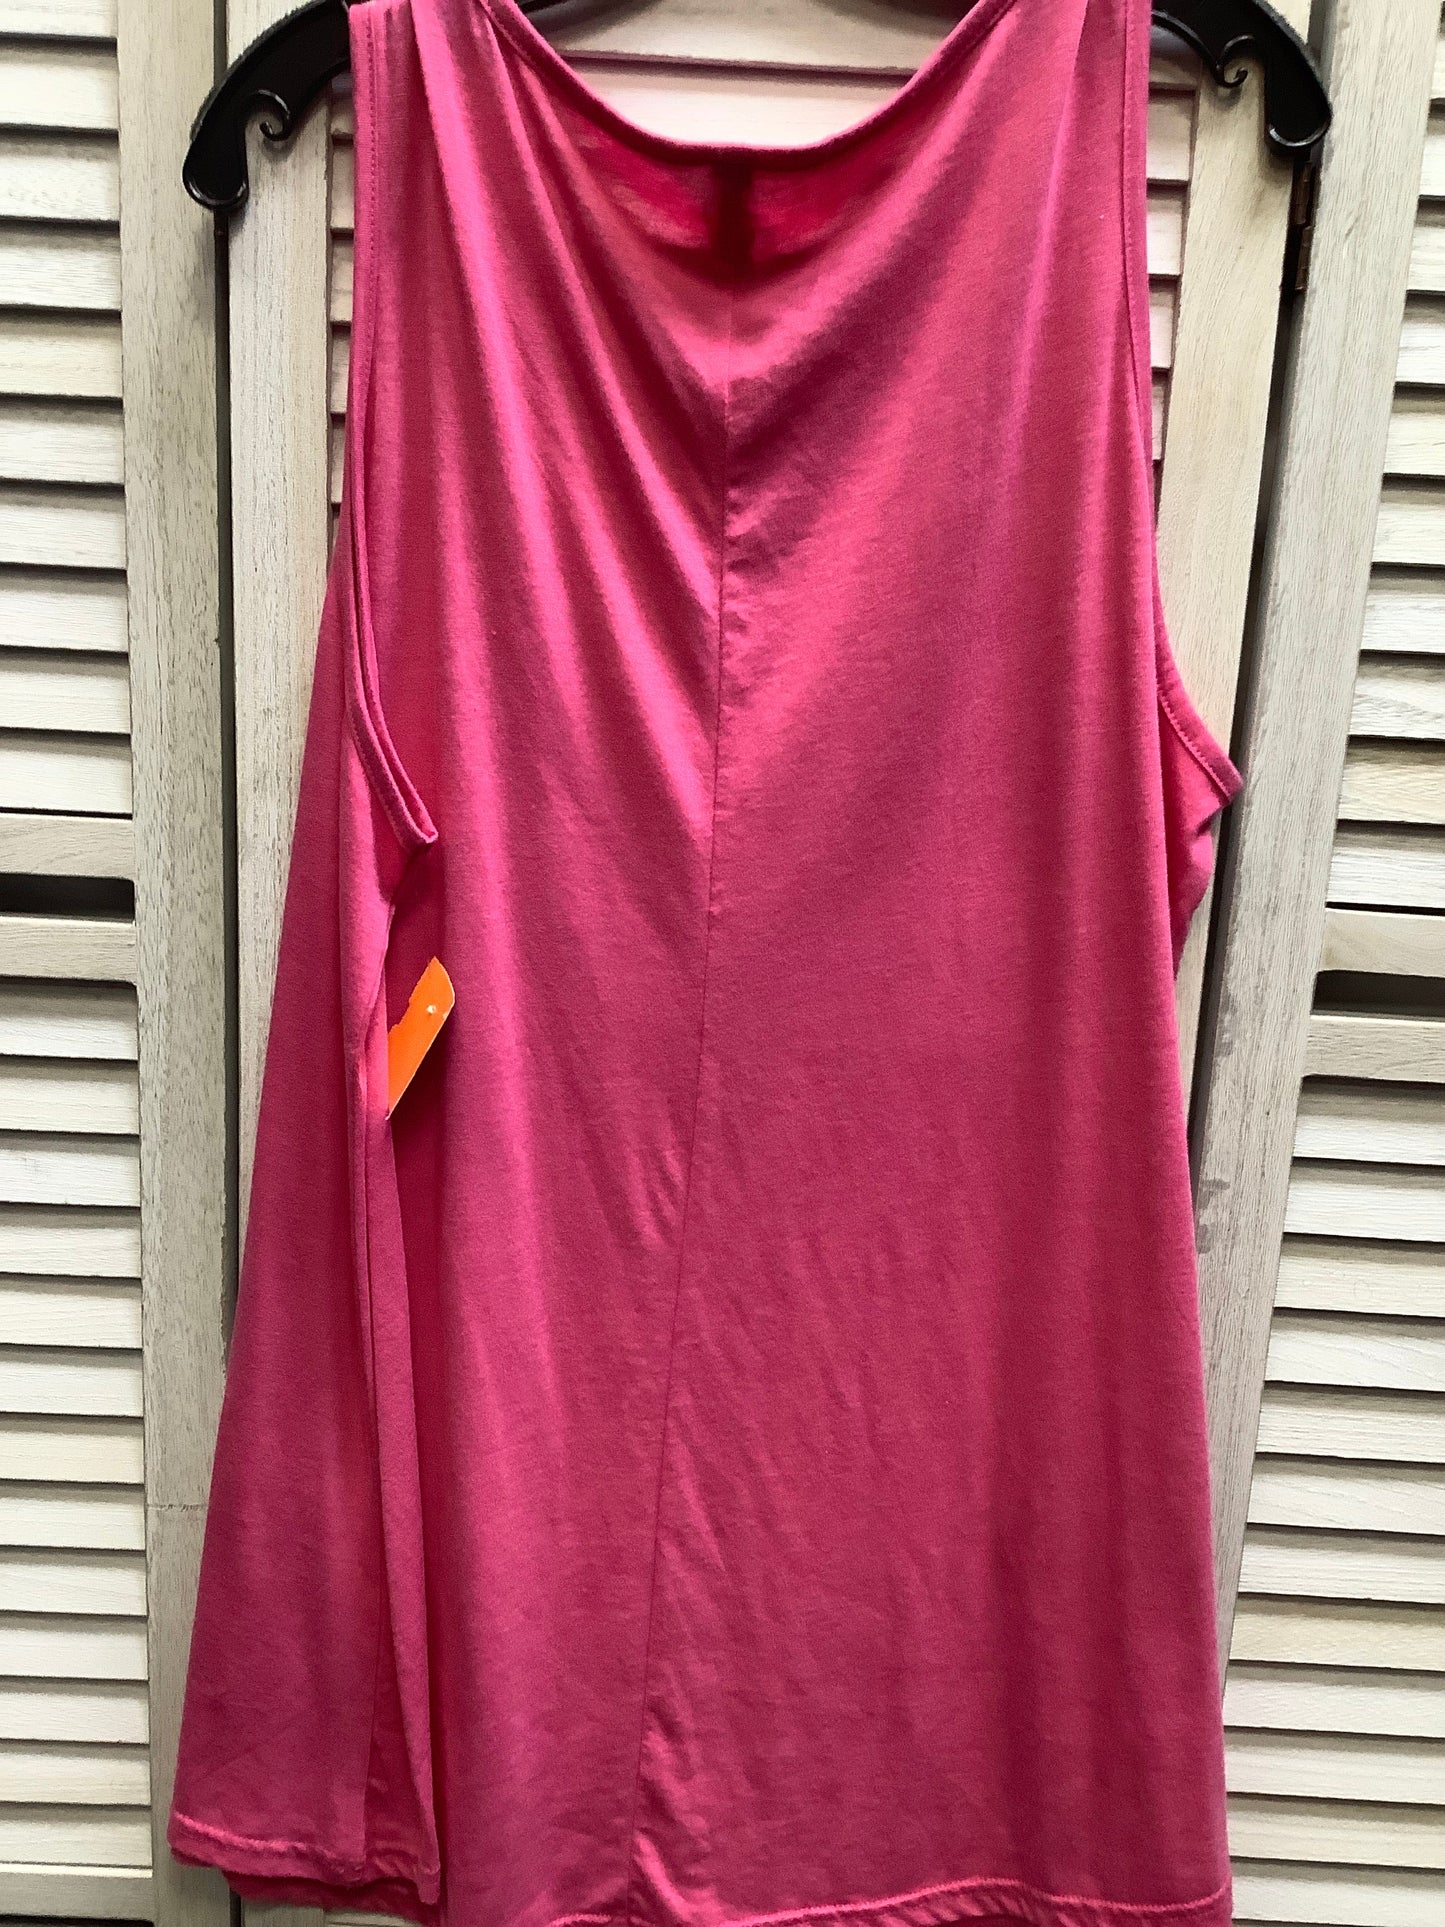 Pink Dress Casual Short Epic, Size 3x